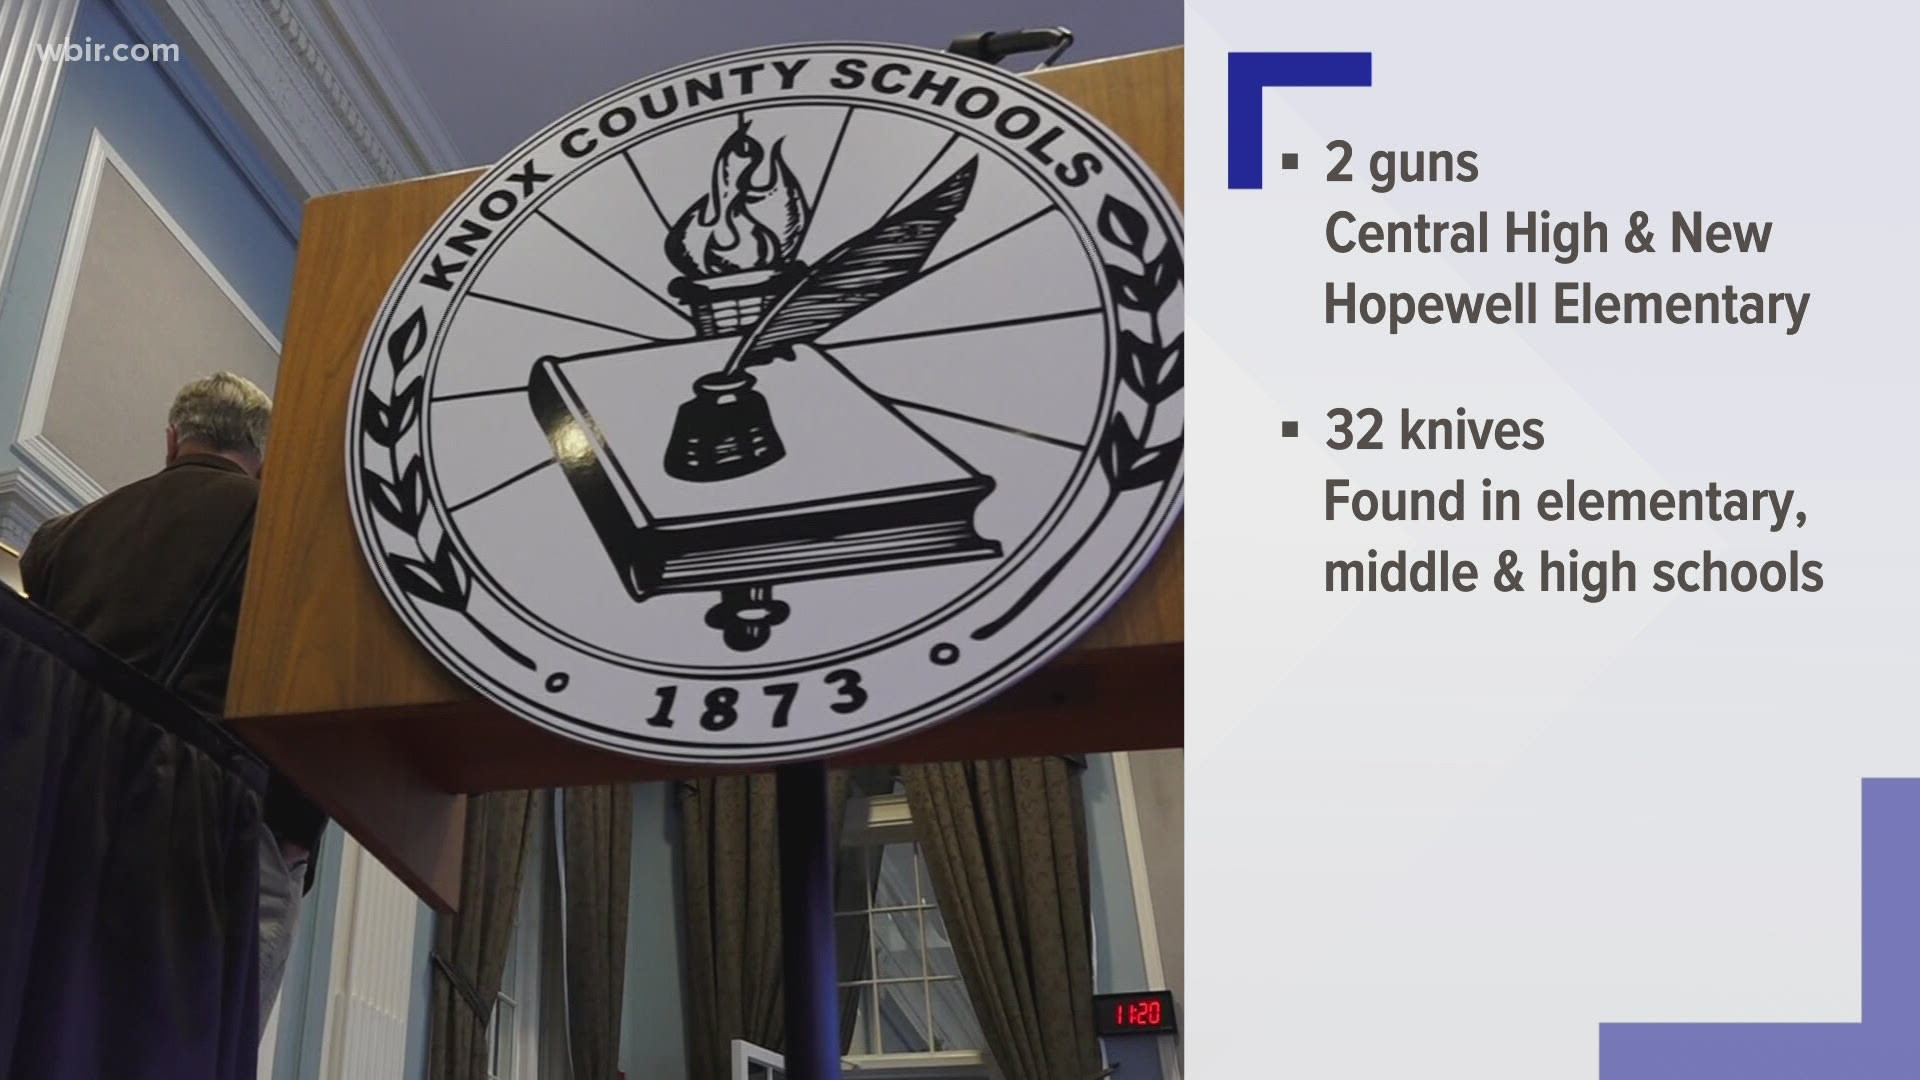 As of March 26, two firearms were found in Knox County Schools — one at Central High School and the other at New Hopewell Elementary.